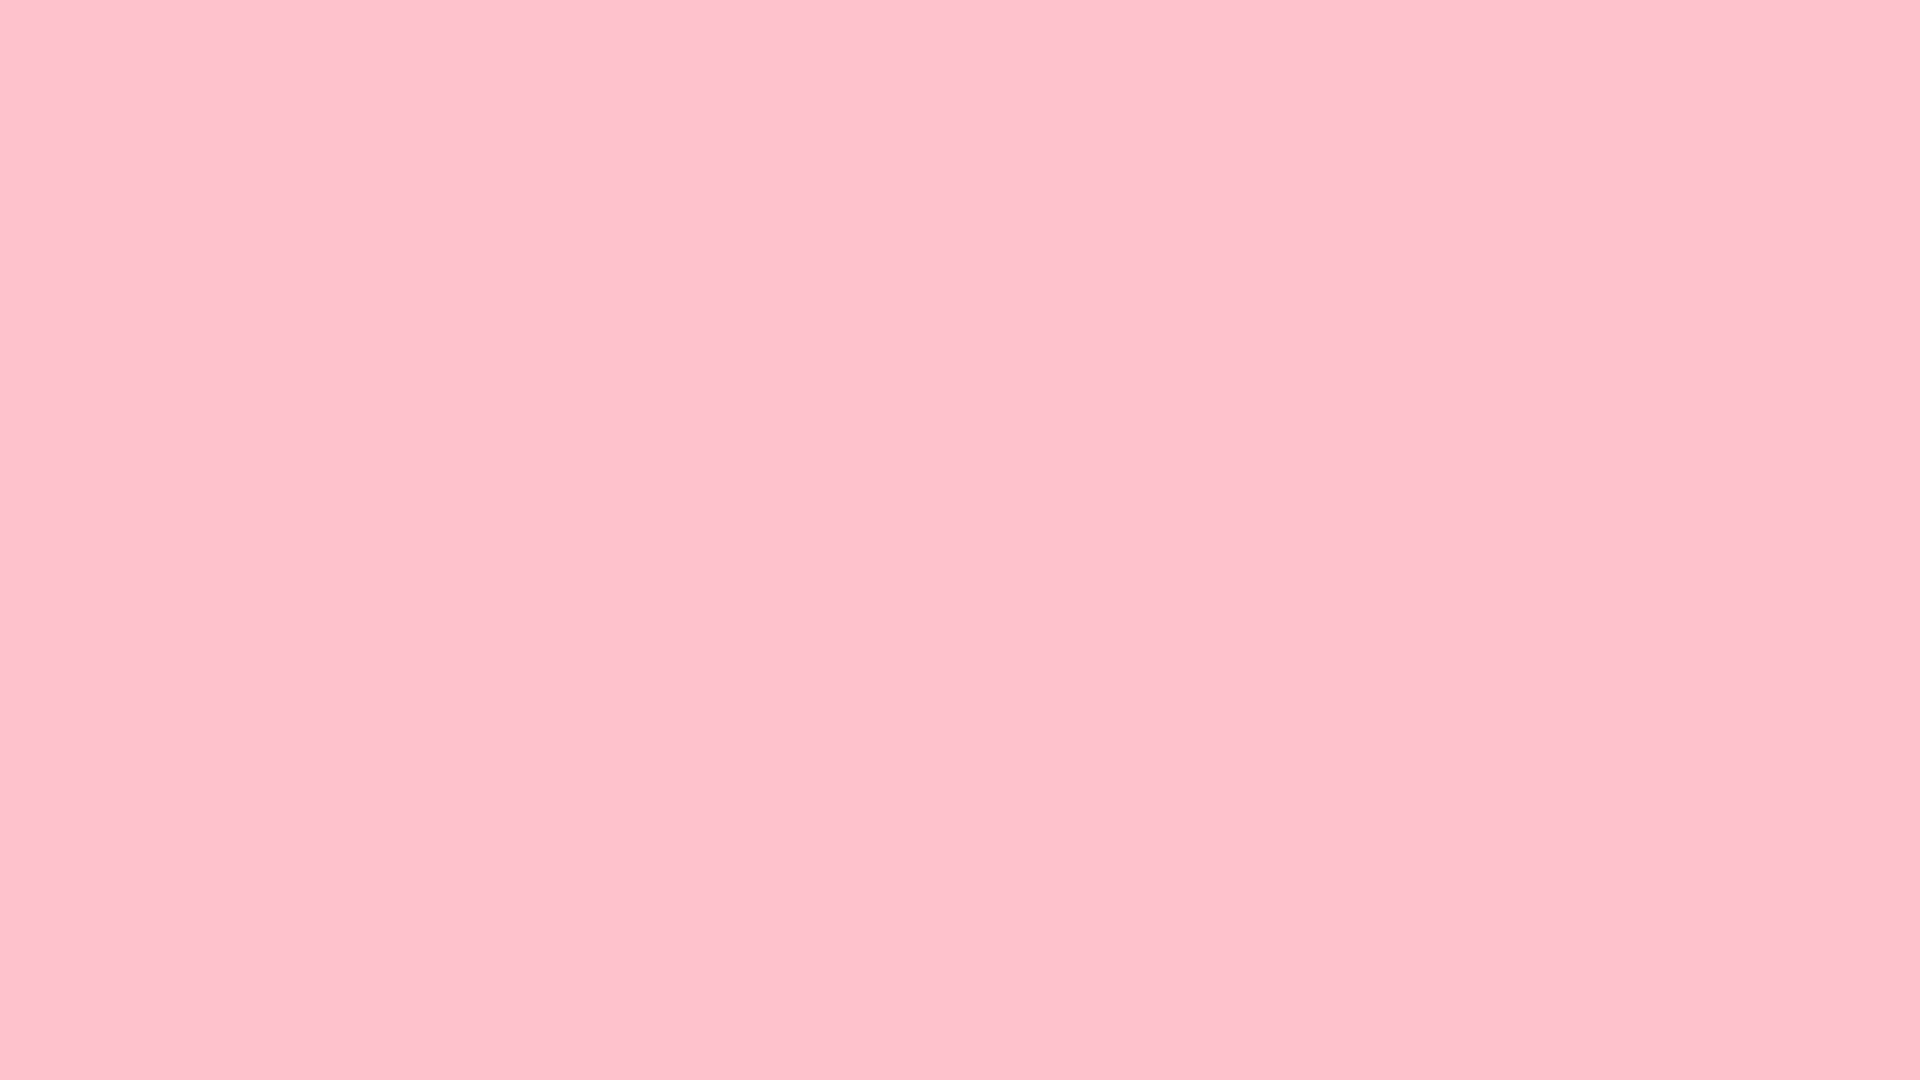 Solid Pink - A Calm and Subtle Background